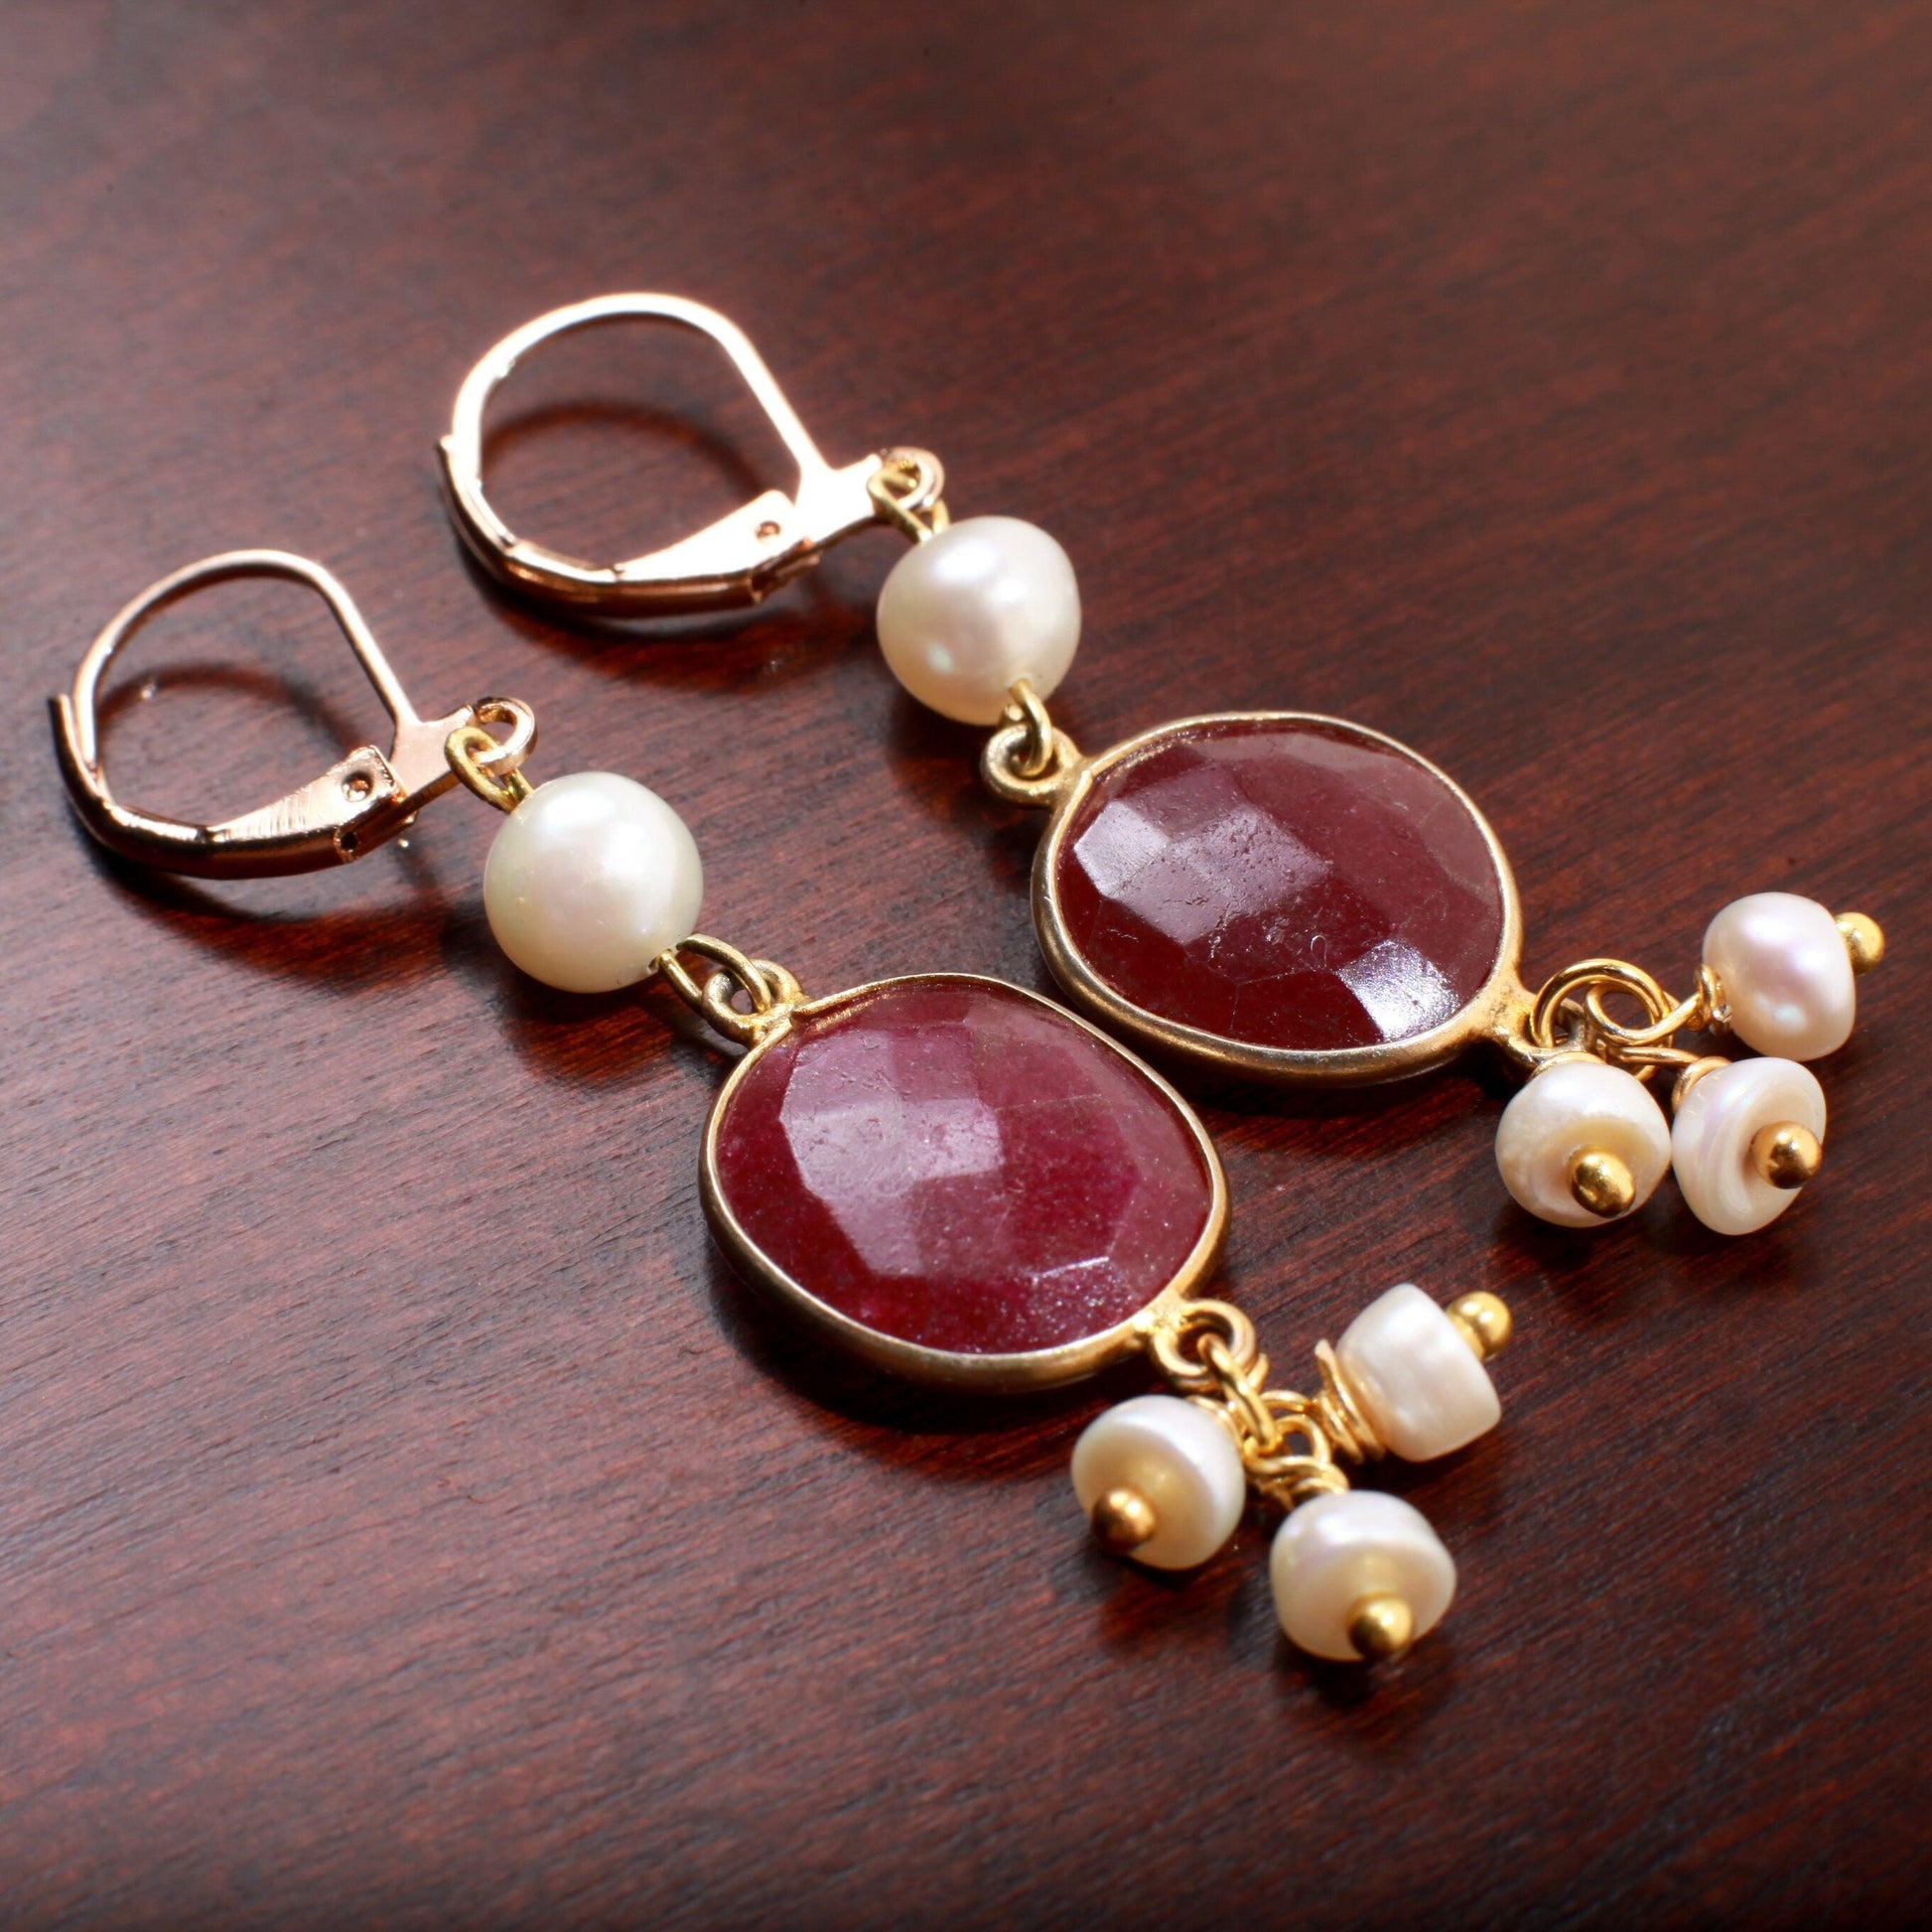 Ruby Earring Genuine Ruby Free Form Oval Bezel with Fresh Water Pearl Clusters Earrings in Gold Ear Wire, Valentine, Bridesmaid,Gift for her